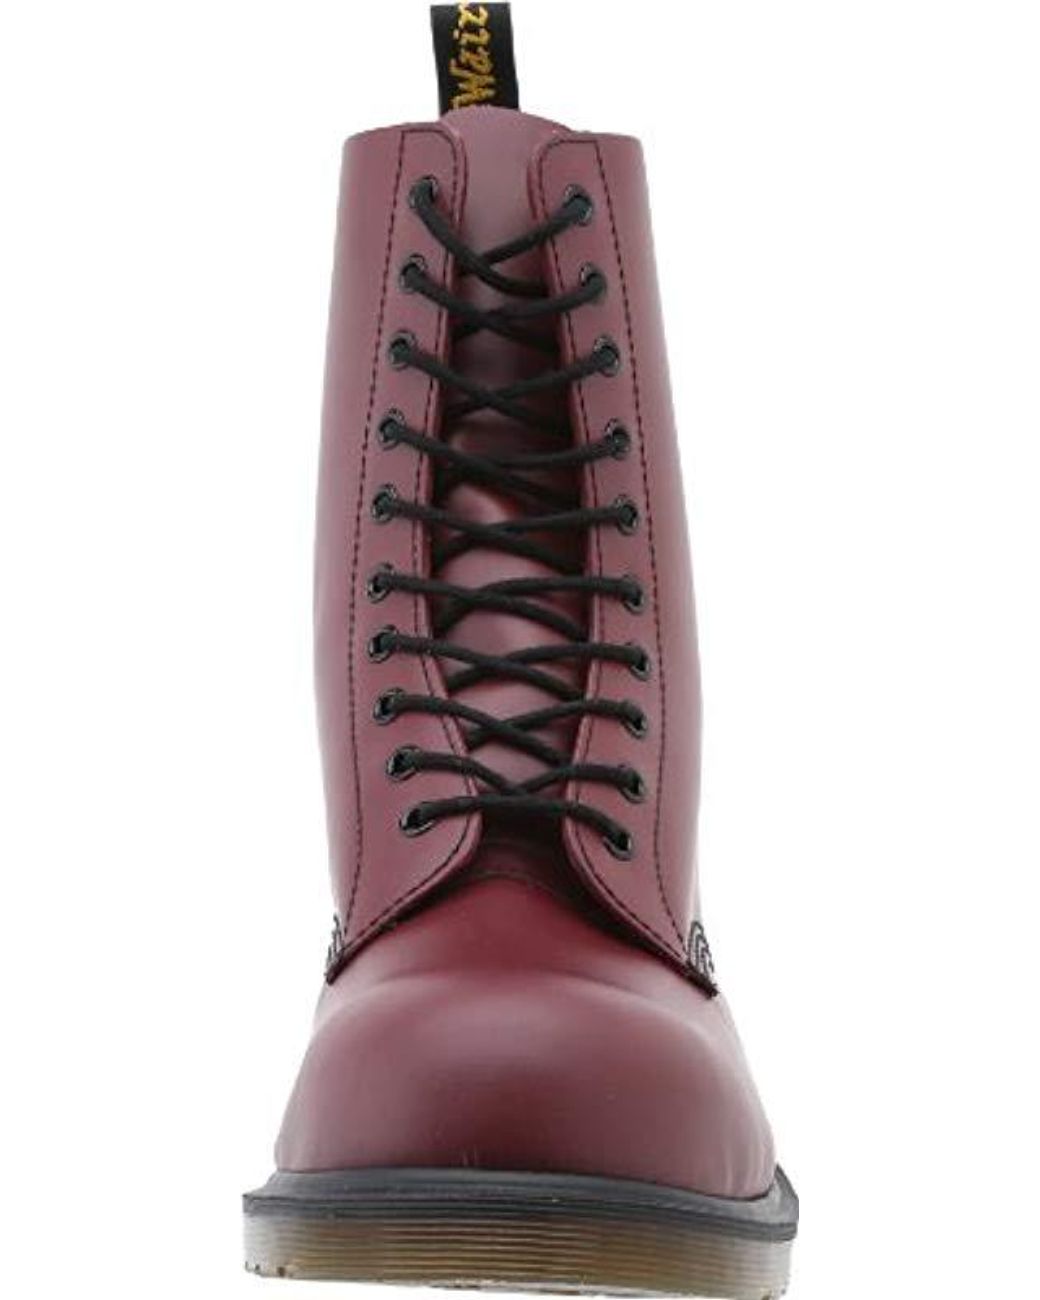 Dr. Martens 1919 Unisex Steel Toe Leather Boot in Cherry Red (Red) | Lyst